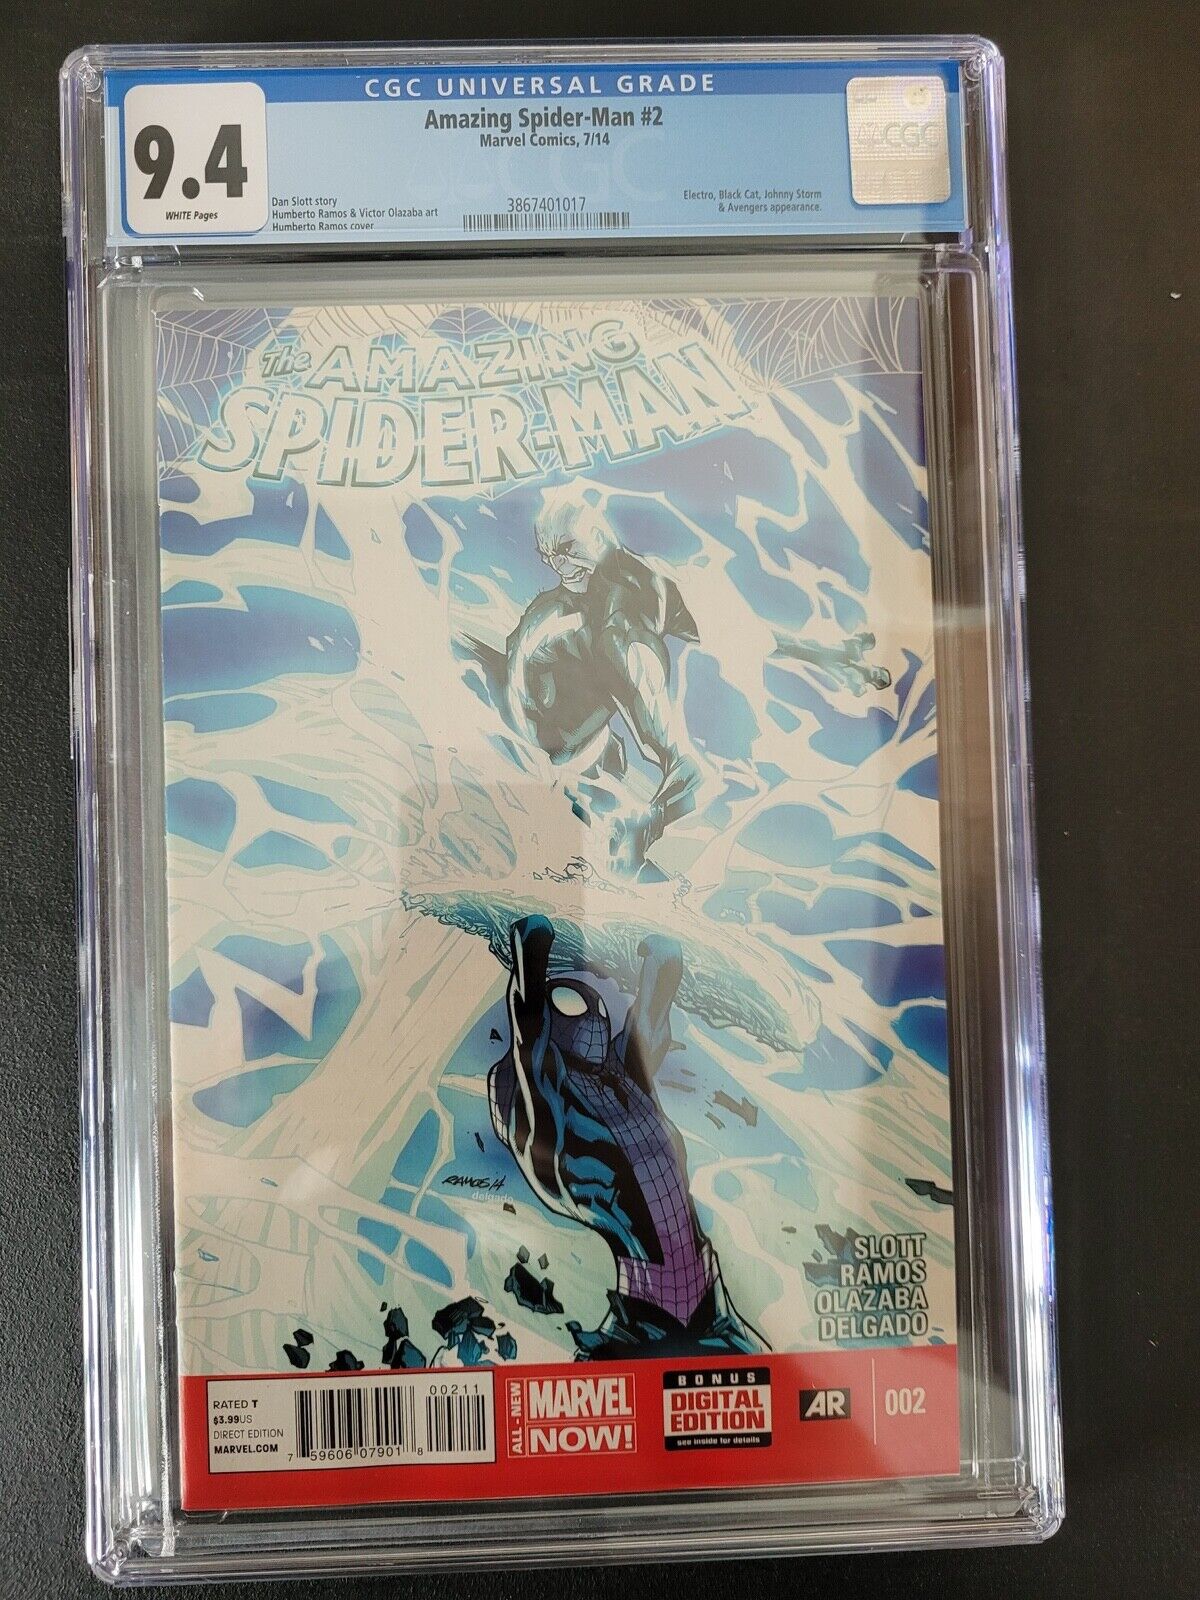 AMAZING SPIDER-MAN #2 CGC 9.4 GRADED 2014 CAMEO APPEARANCE OF CINDY MOON